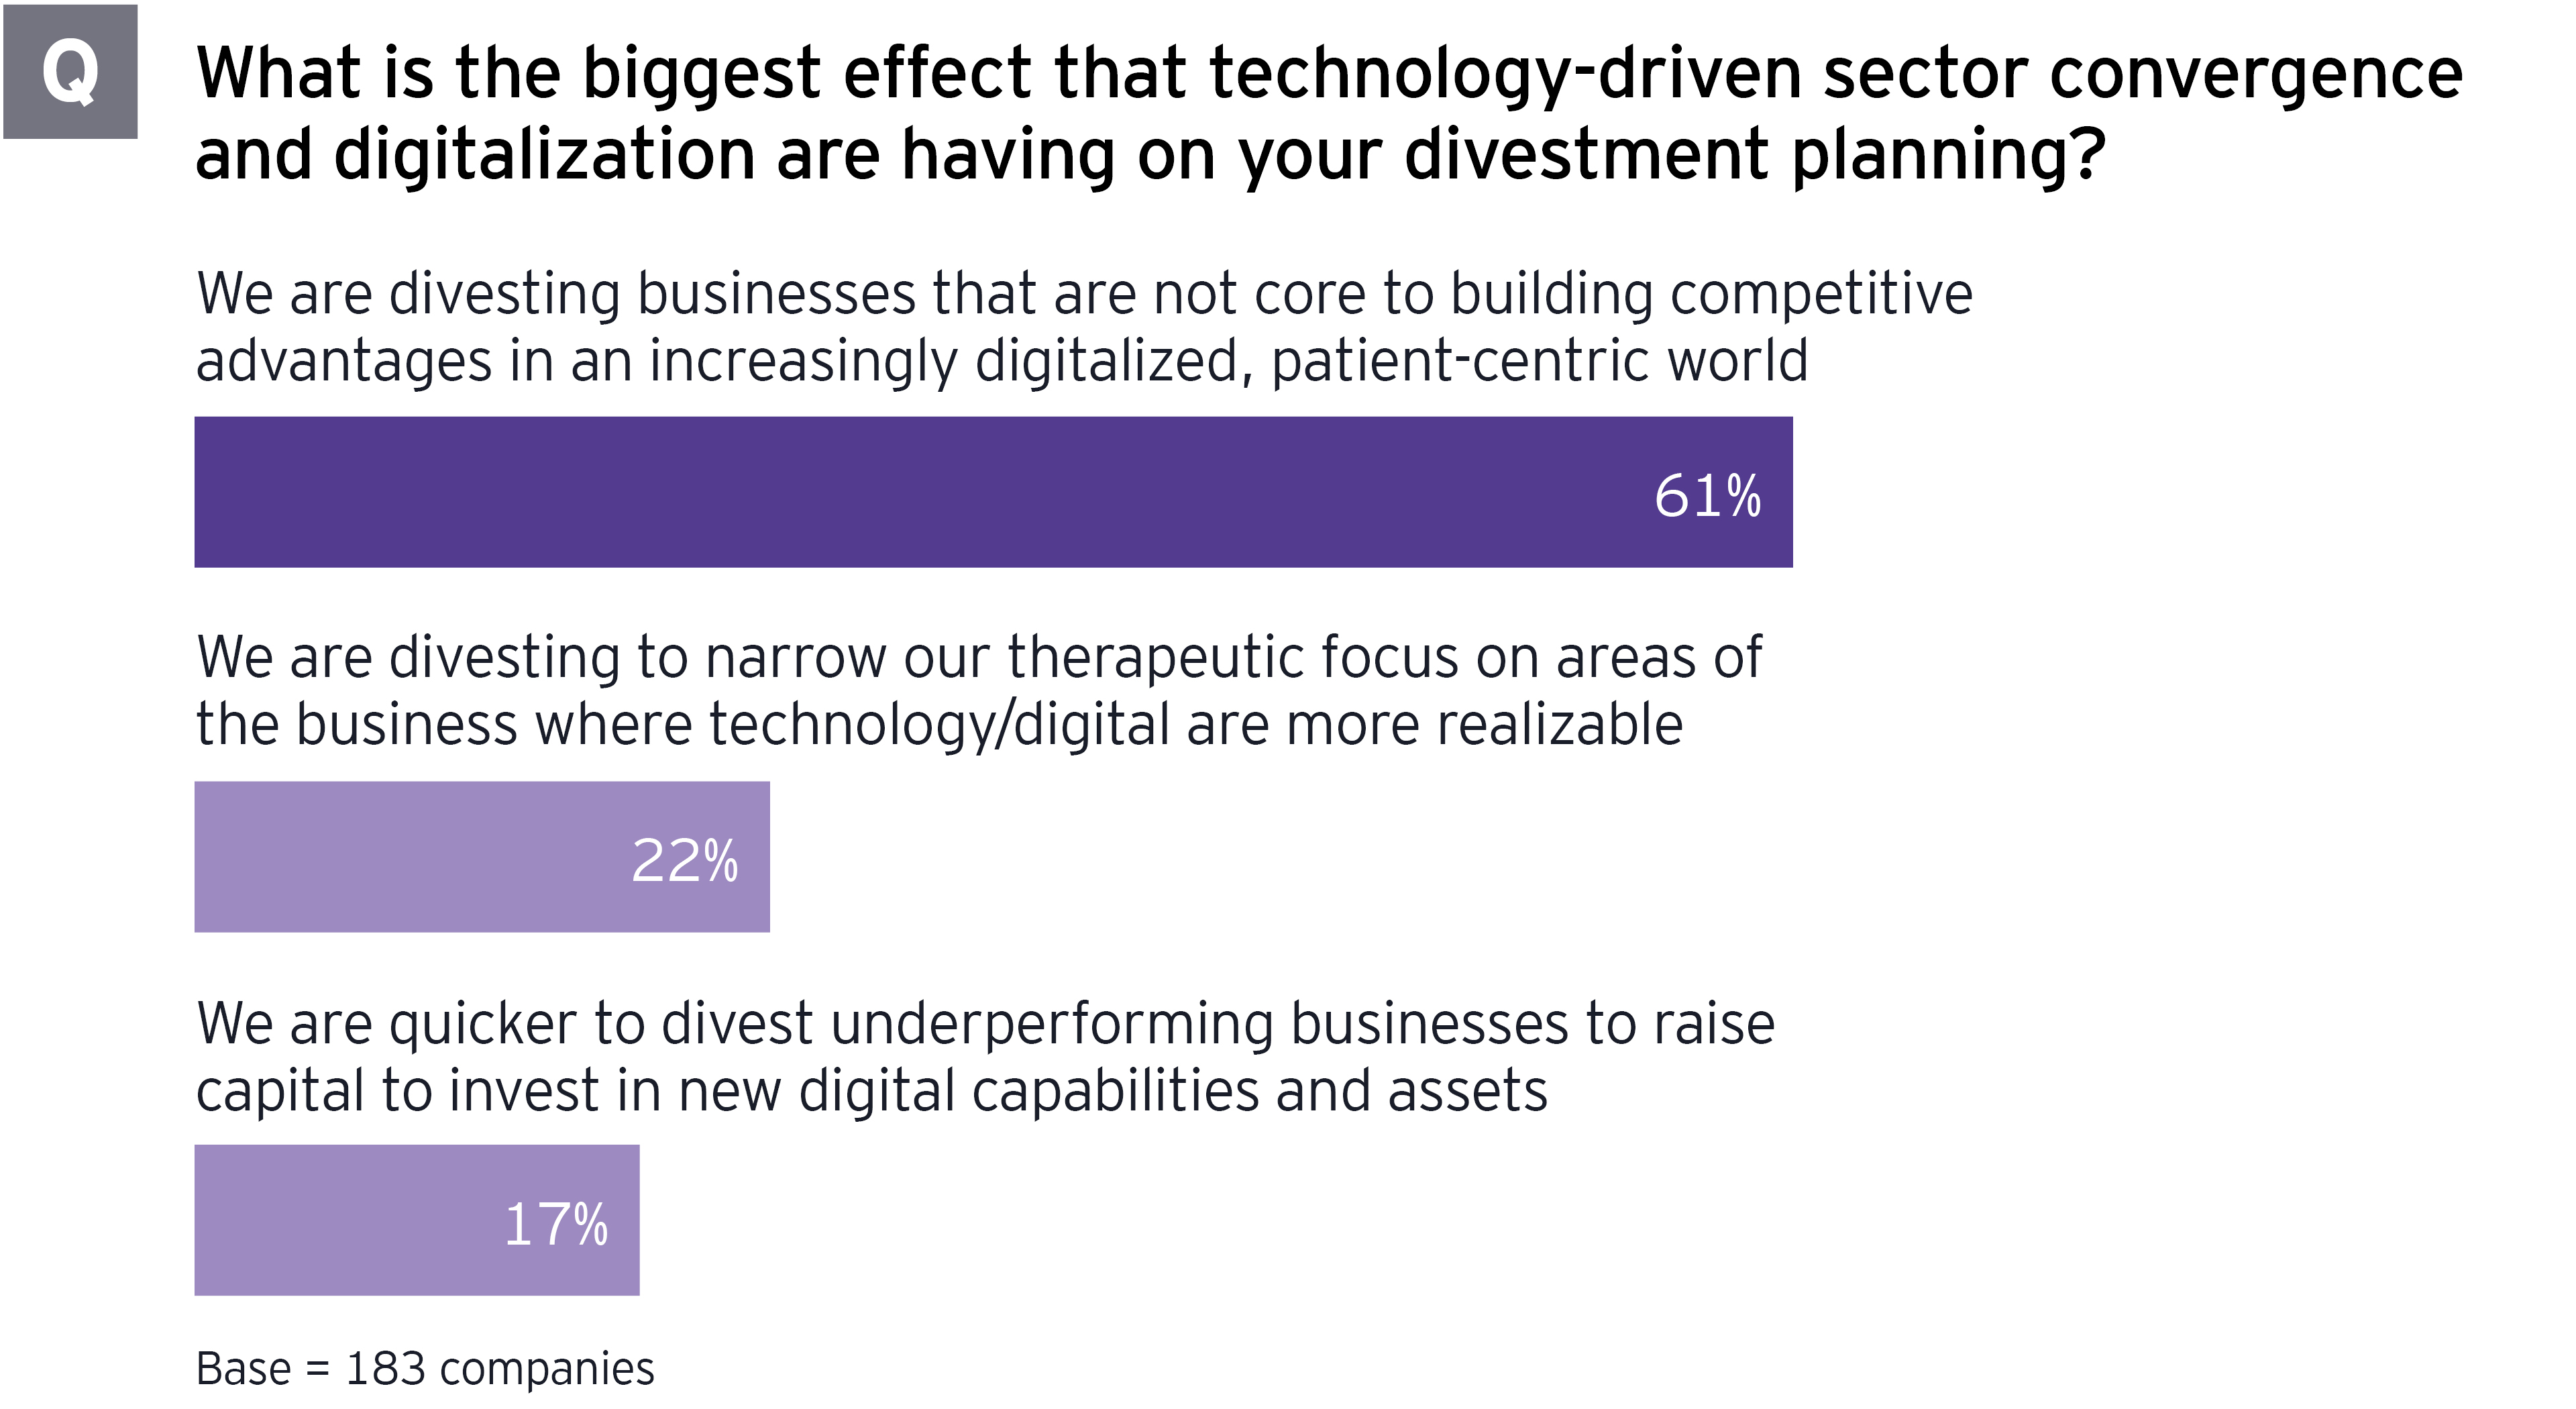 Tech-driven sector convergence, digitalization effects on life sciences divestment planning